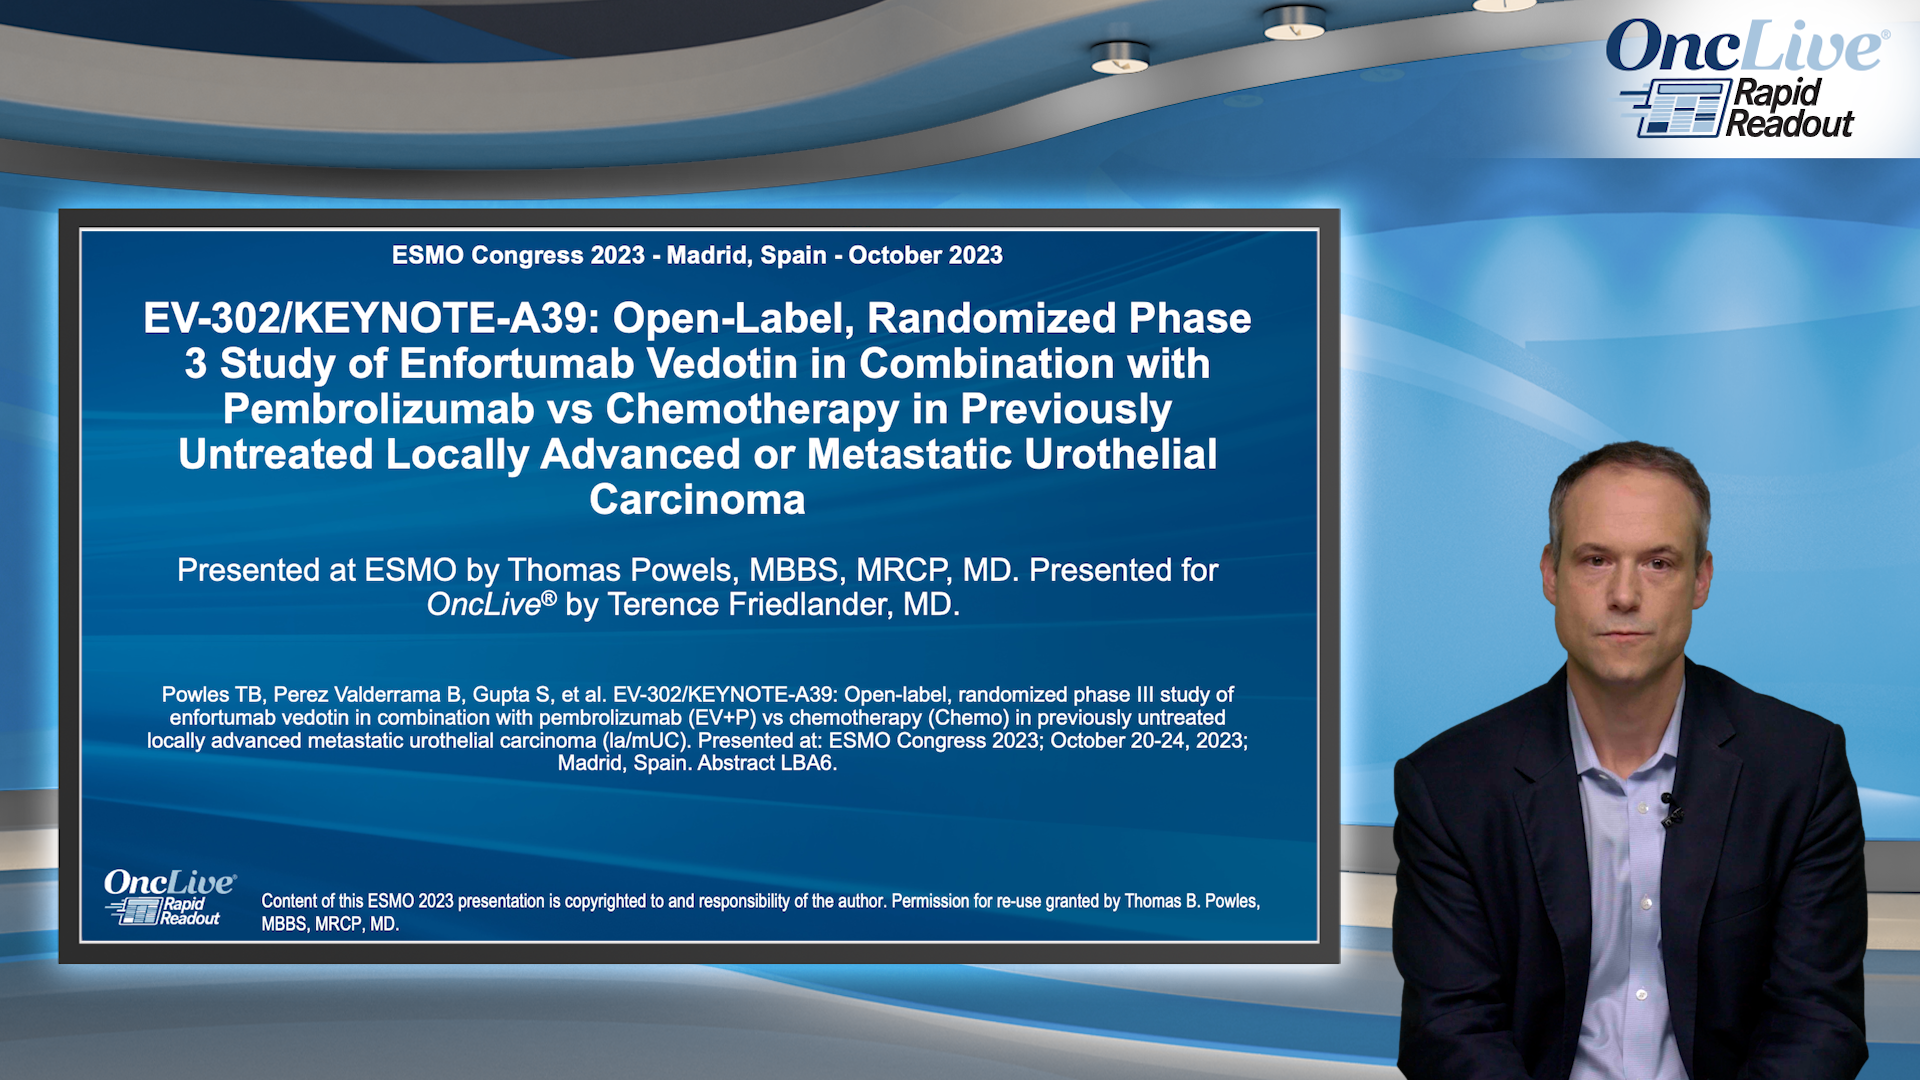 EV-302/KEYNOTE-A39: Open-Label, Randomized Phase 3 Study of Enfortumab Vedotin in Combination with Pembrolizumab vs Chemotherapy in Previously Untreated Locally Advanced or Metastatic Urothelial Carcinoma